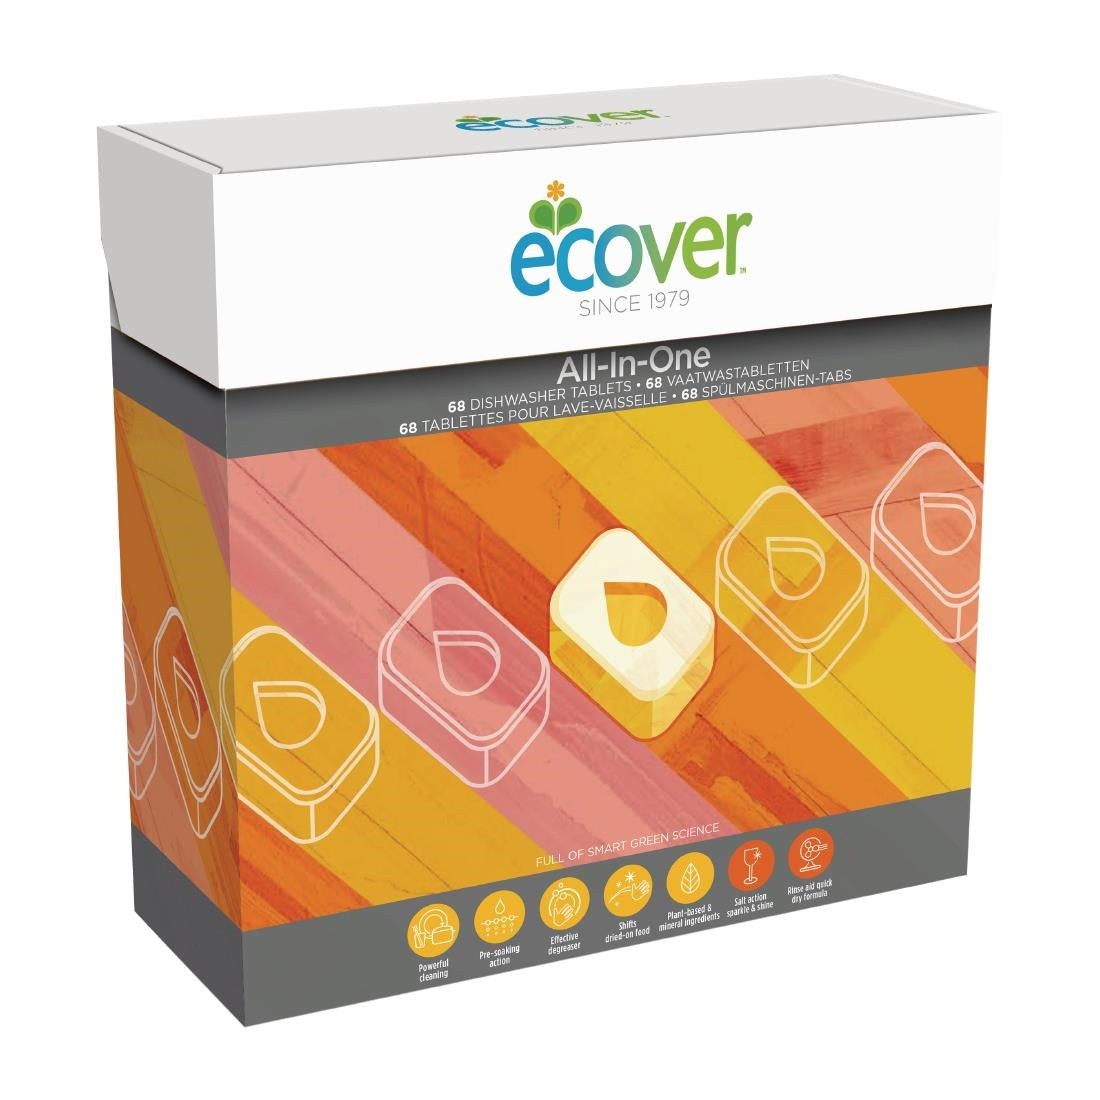 CX192 Ecover All-in-One Dishwasher Tablets (Pack of 68) JD Catering Equipment Solutions Ltd